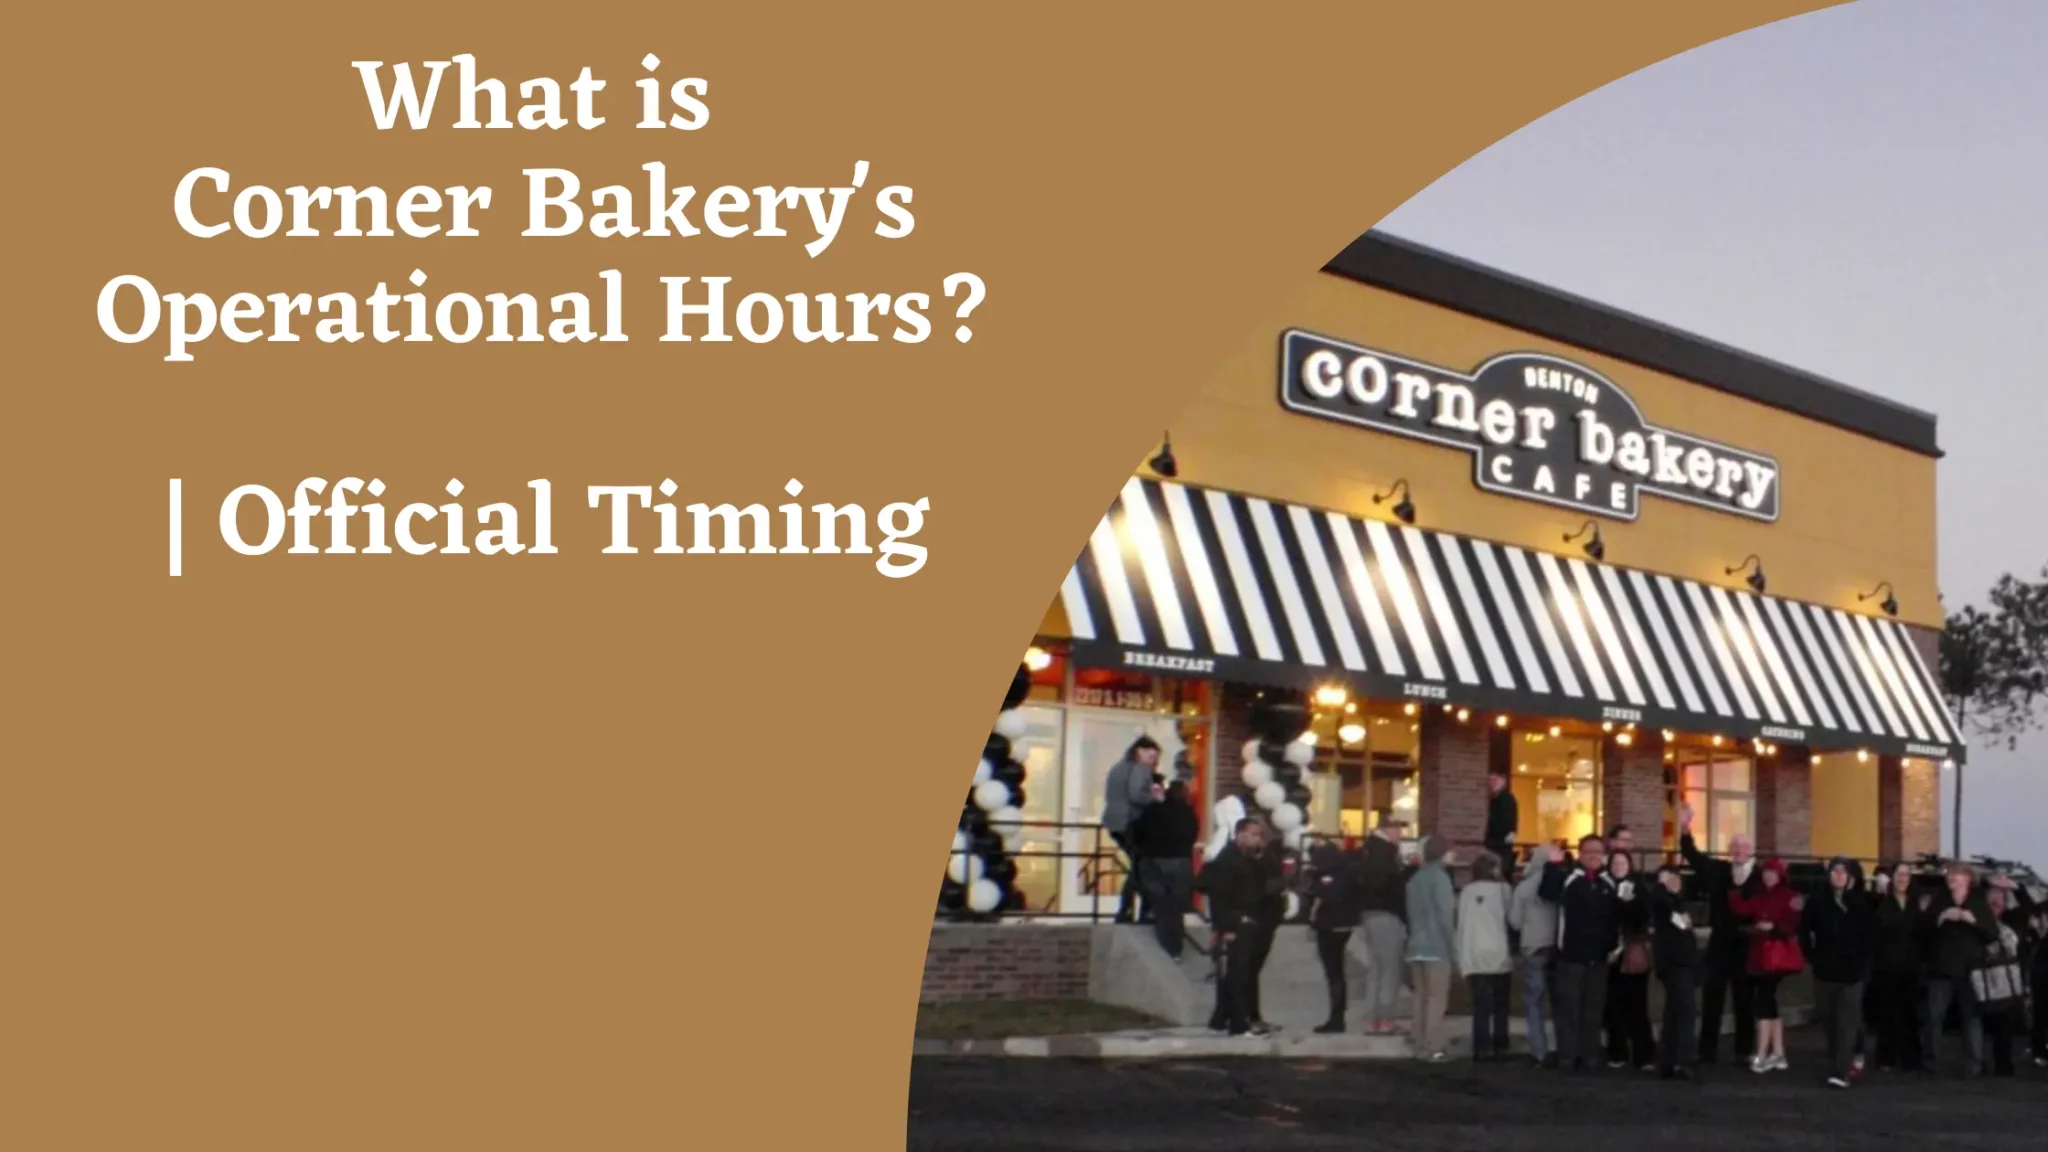 What is Corner Bakery's Operational Hours?